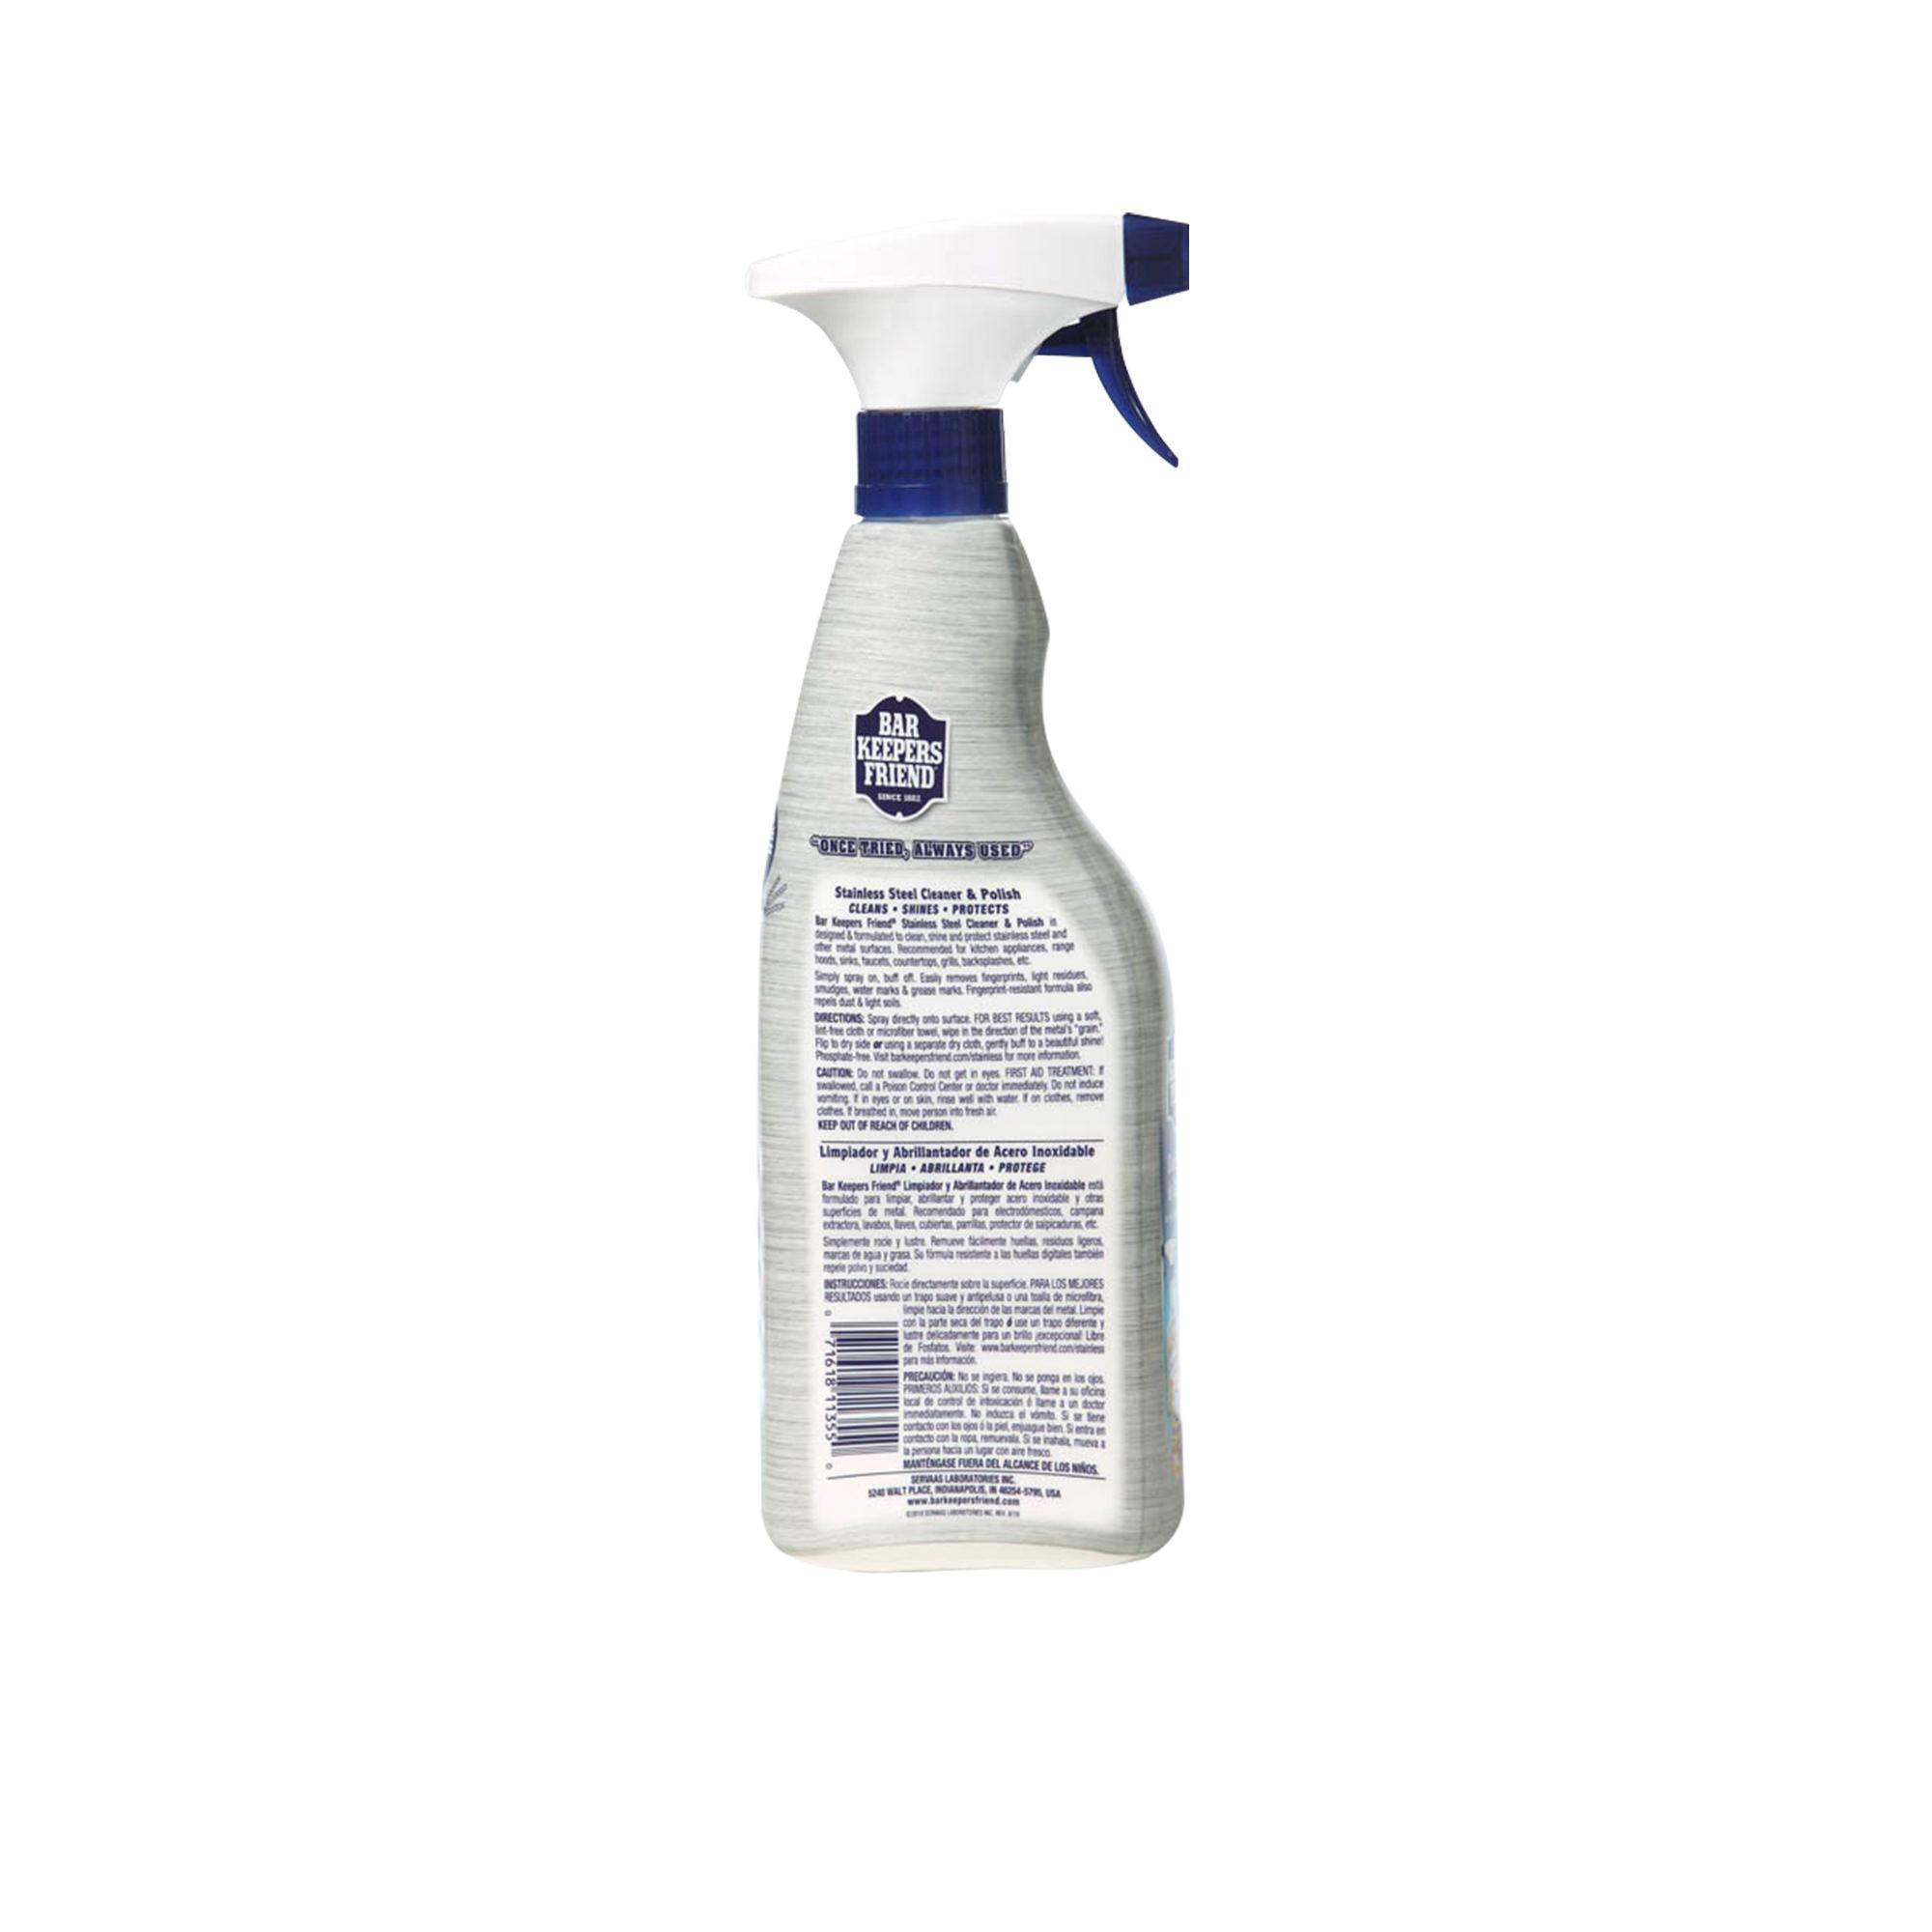 Bar Keepers Friend Stainless Steel Cleaner & Polish Spray 750ml Image 3